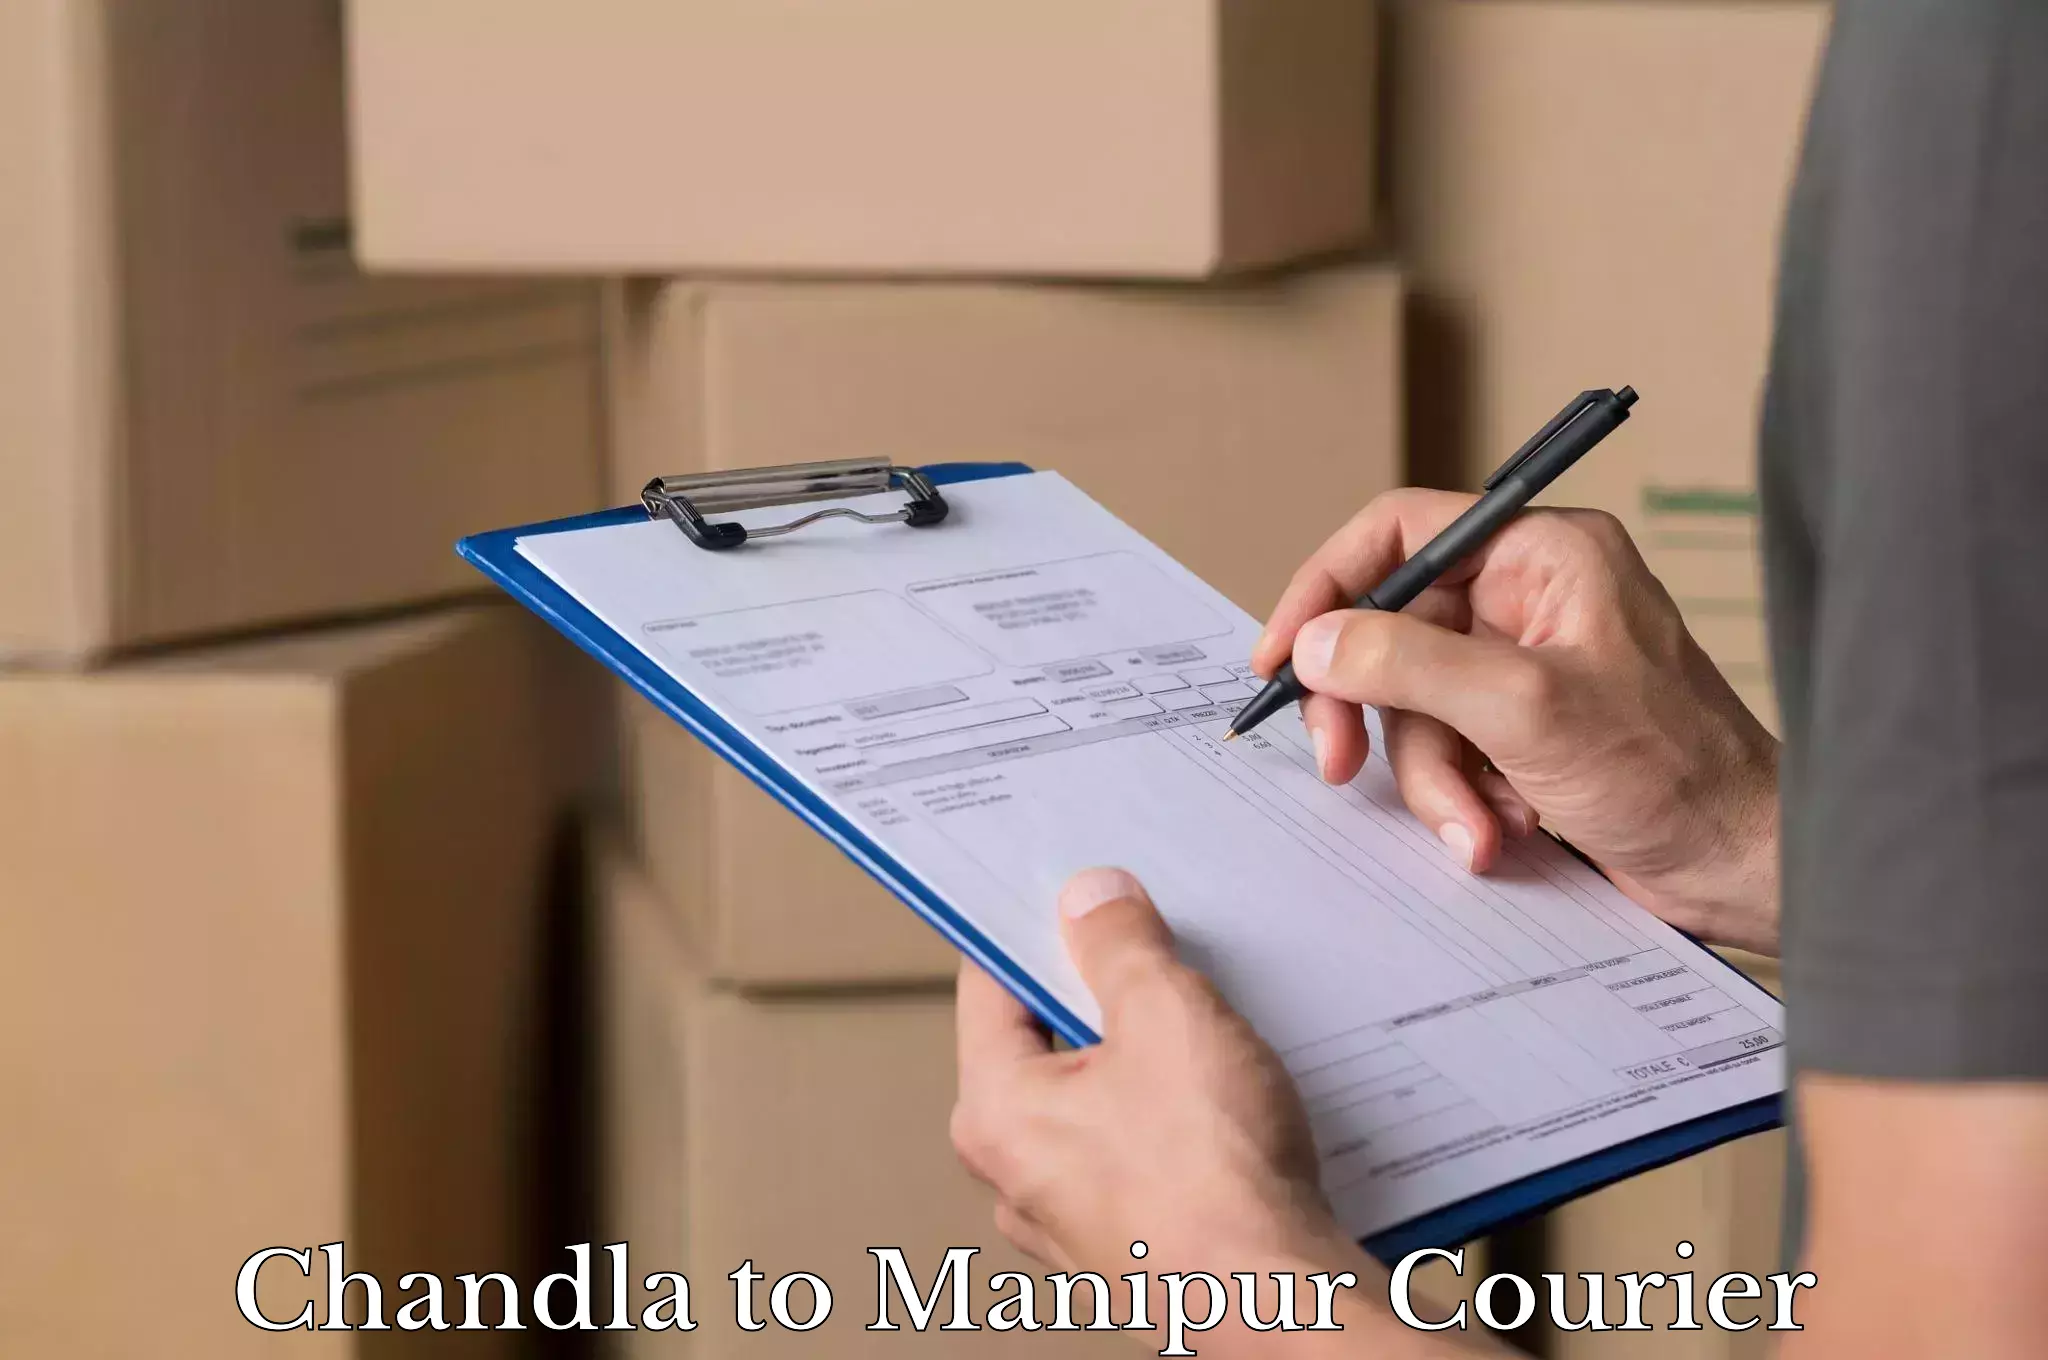 Online luggage shipping booking Chandla to Manipur